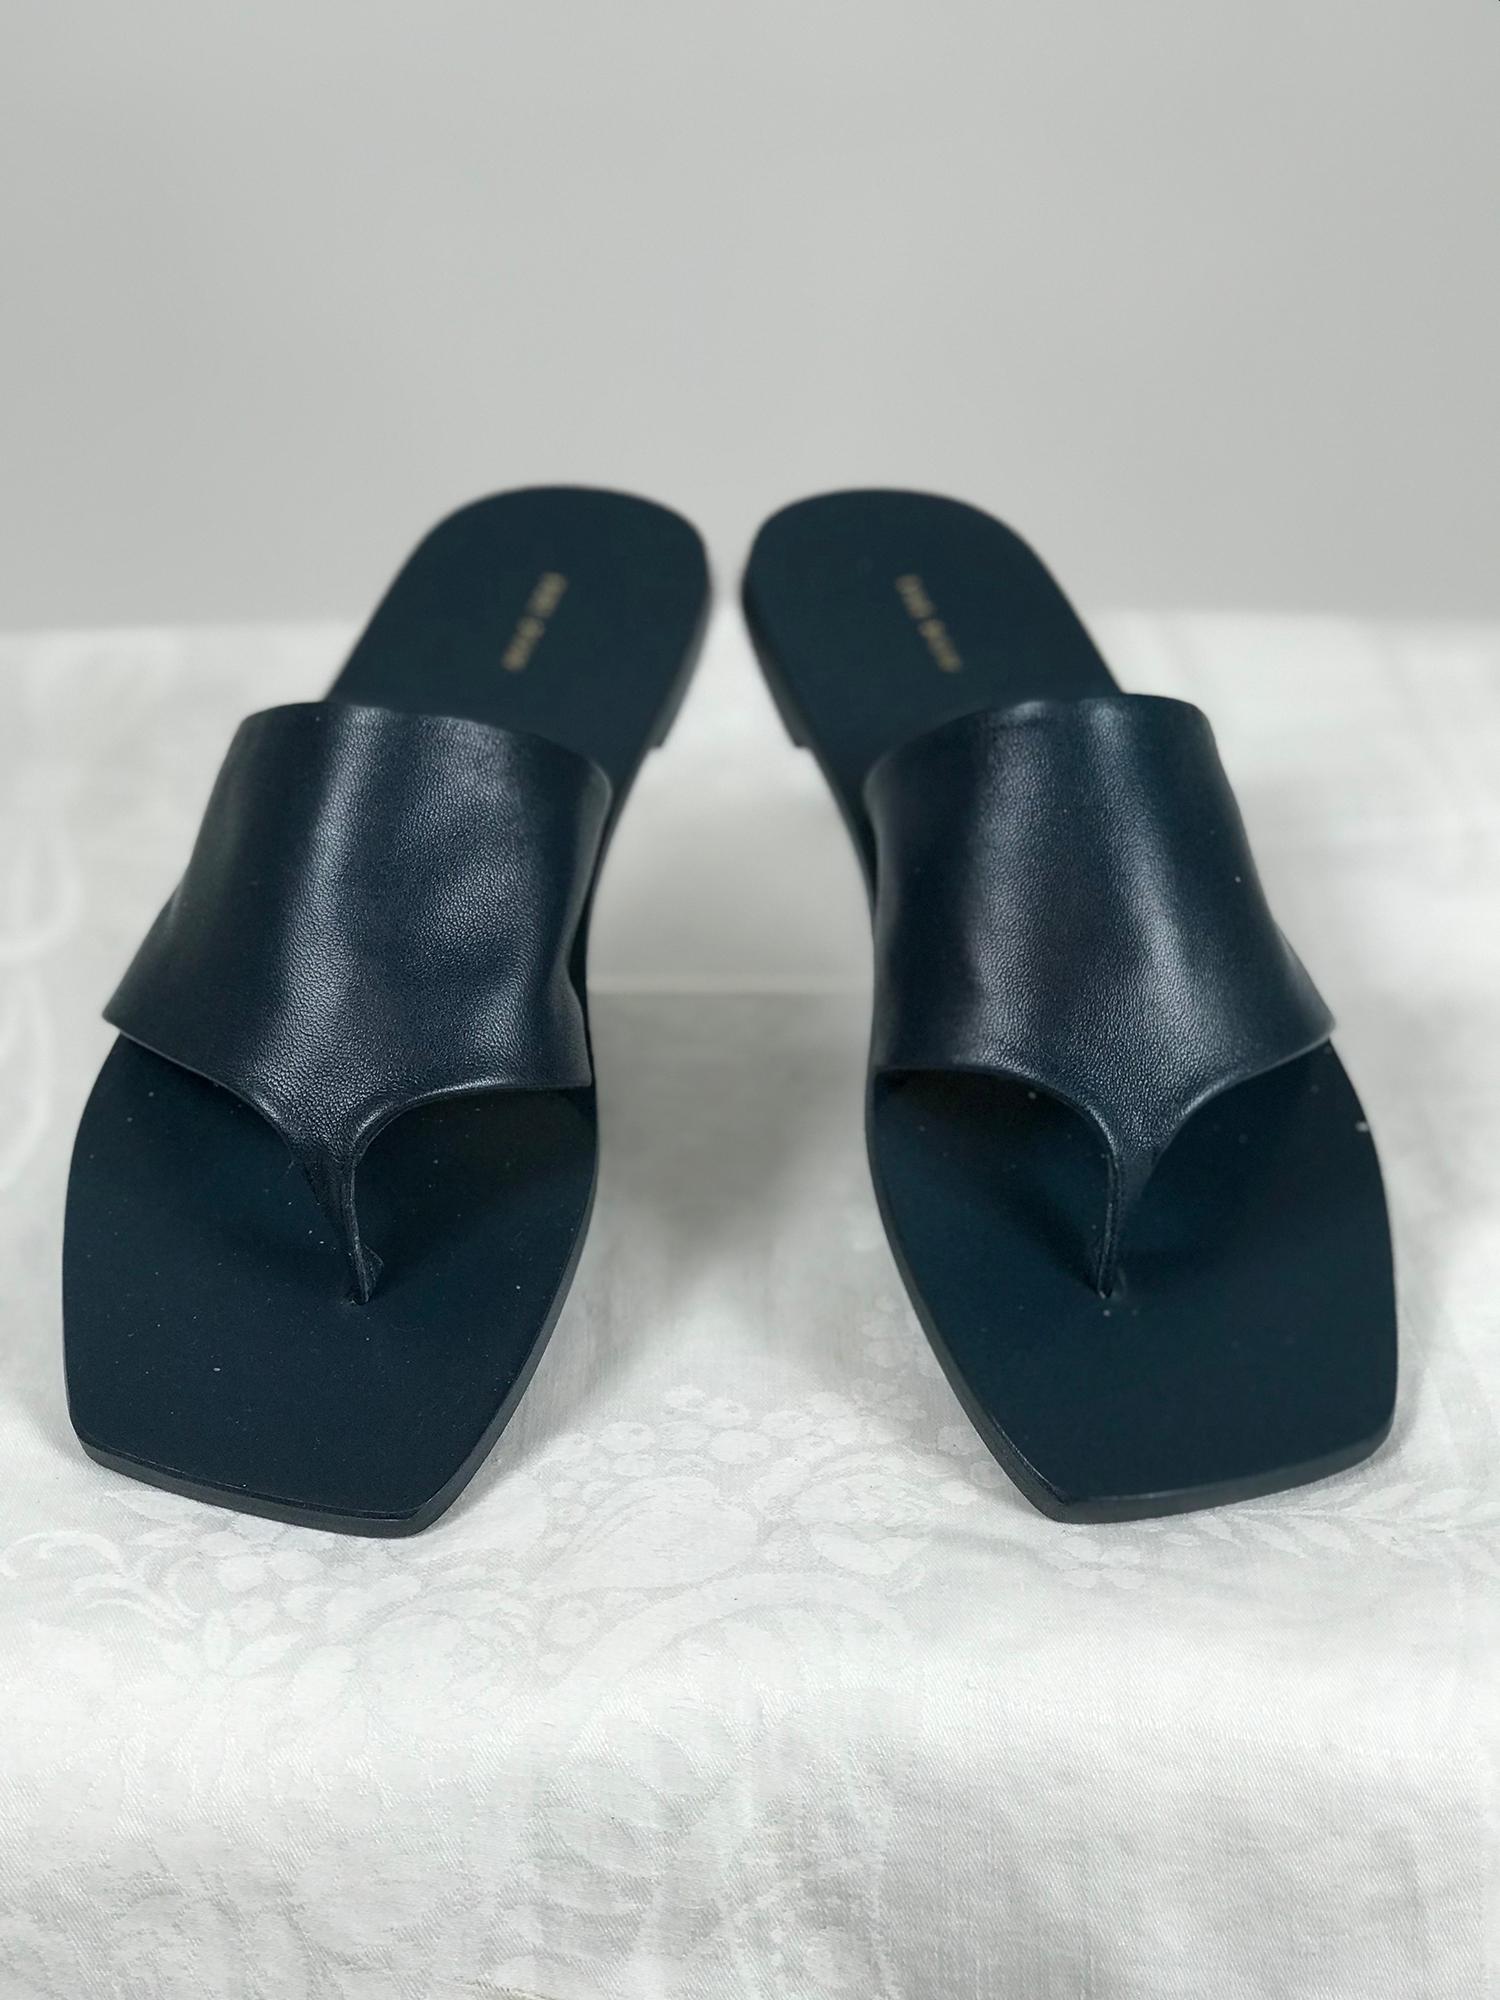 The Row Flip Flop Flat Sandal Teal Glove Nappa Leather 37 Unworn at ...